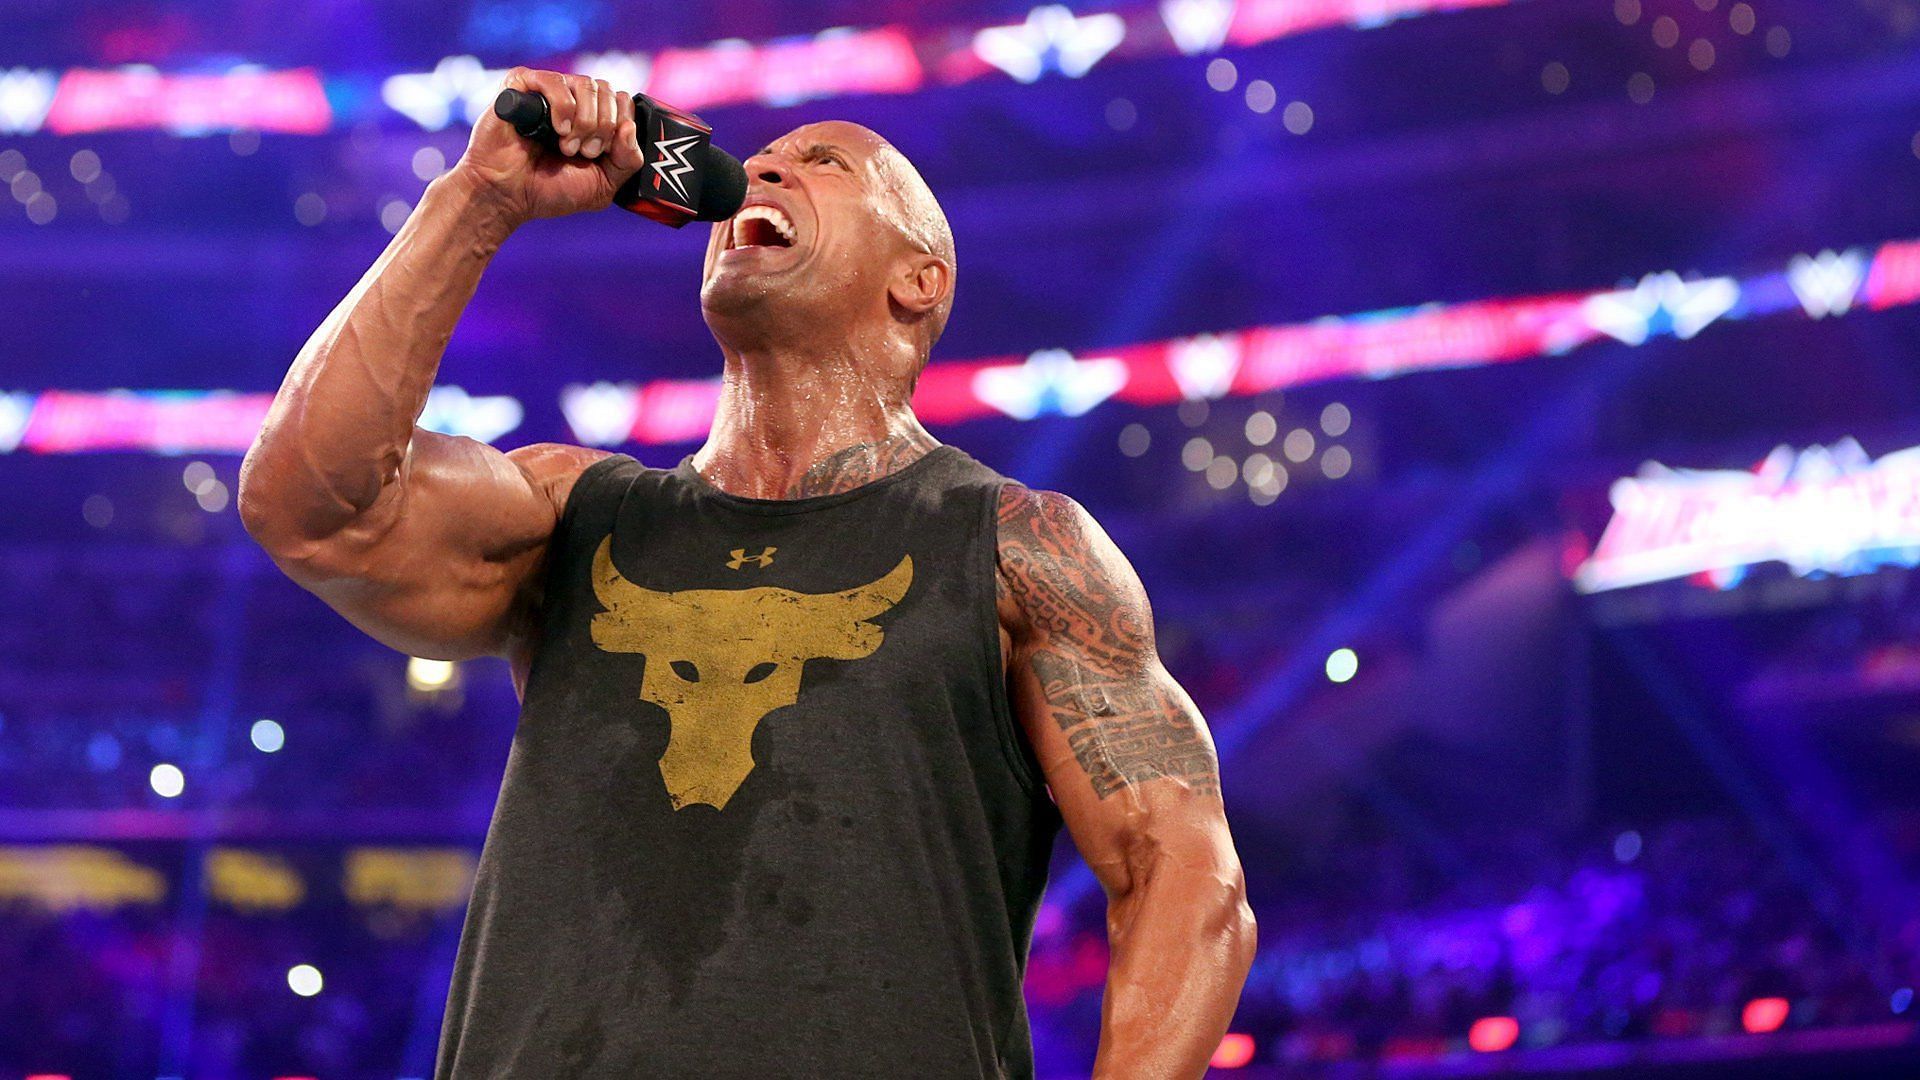 The Rock at WrestleMania